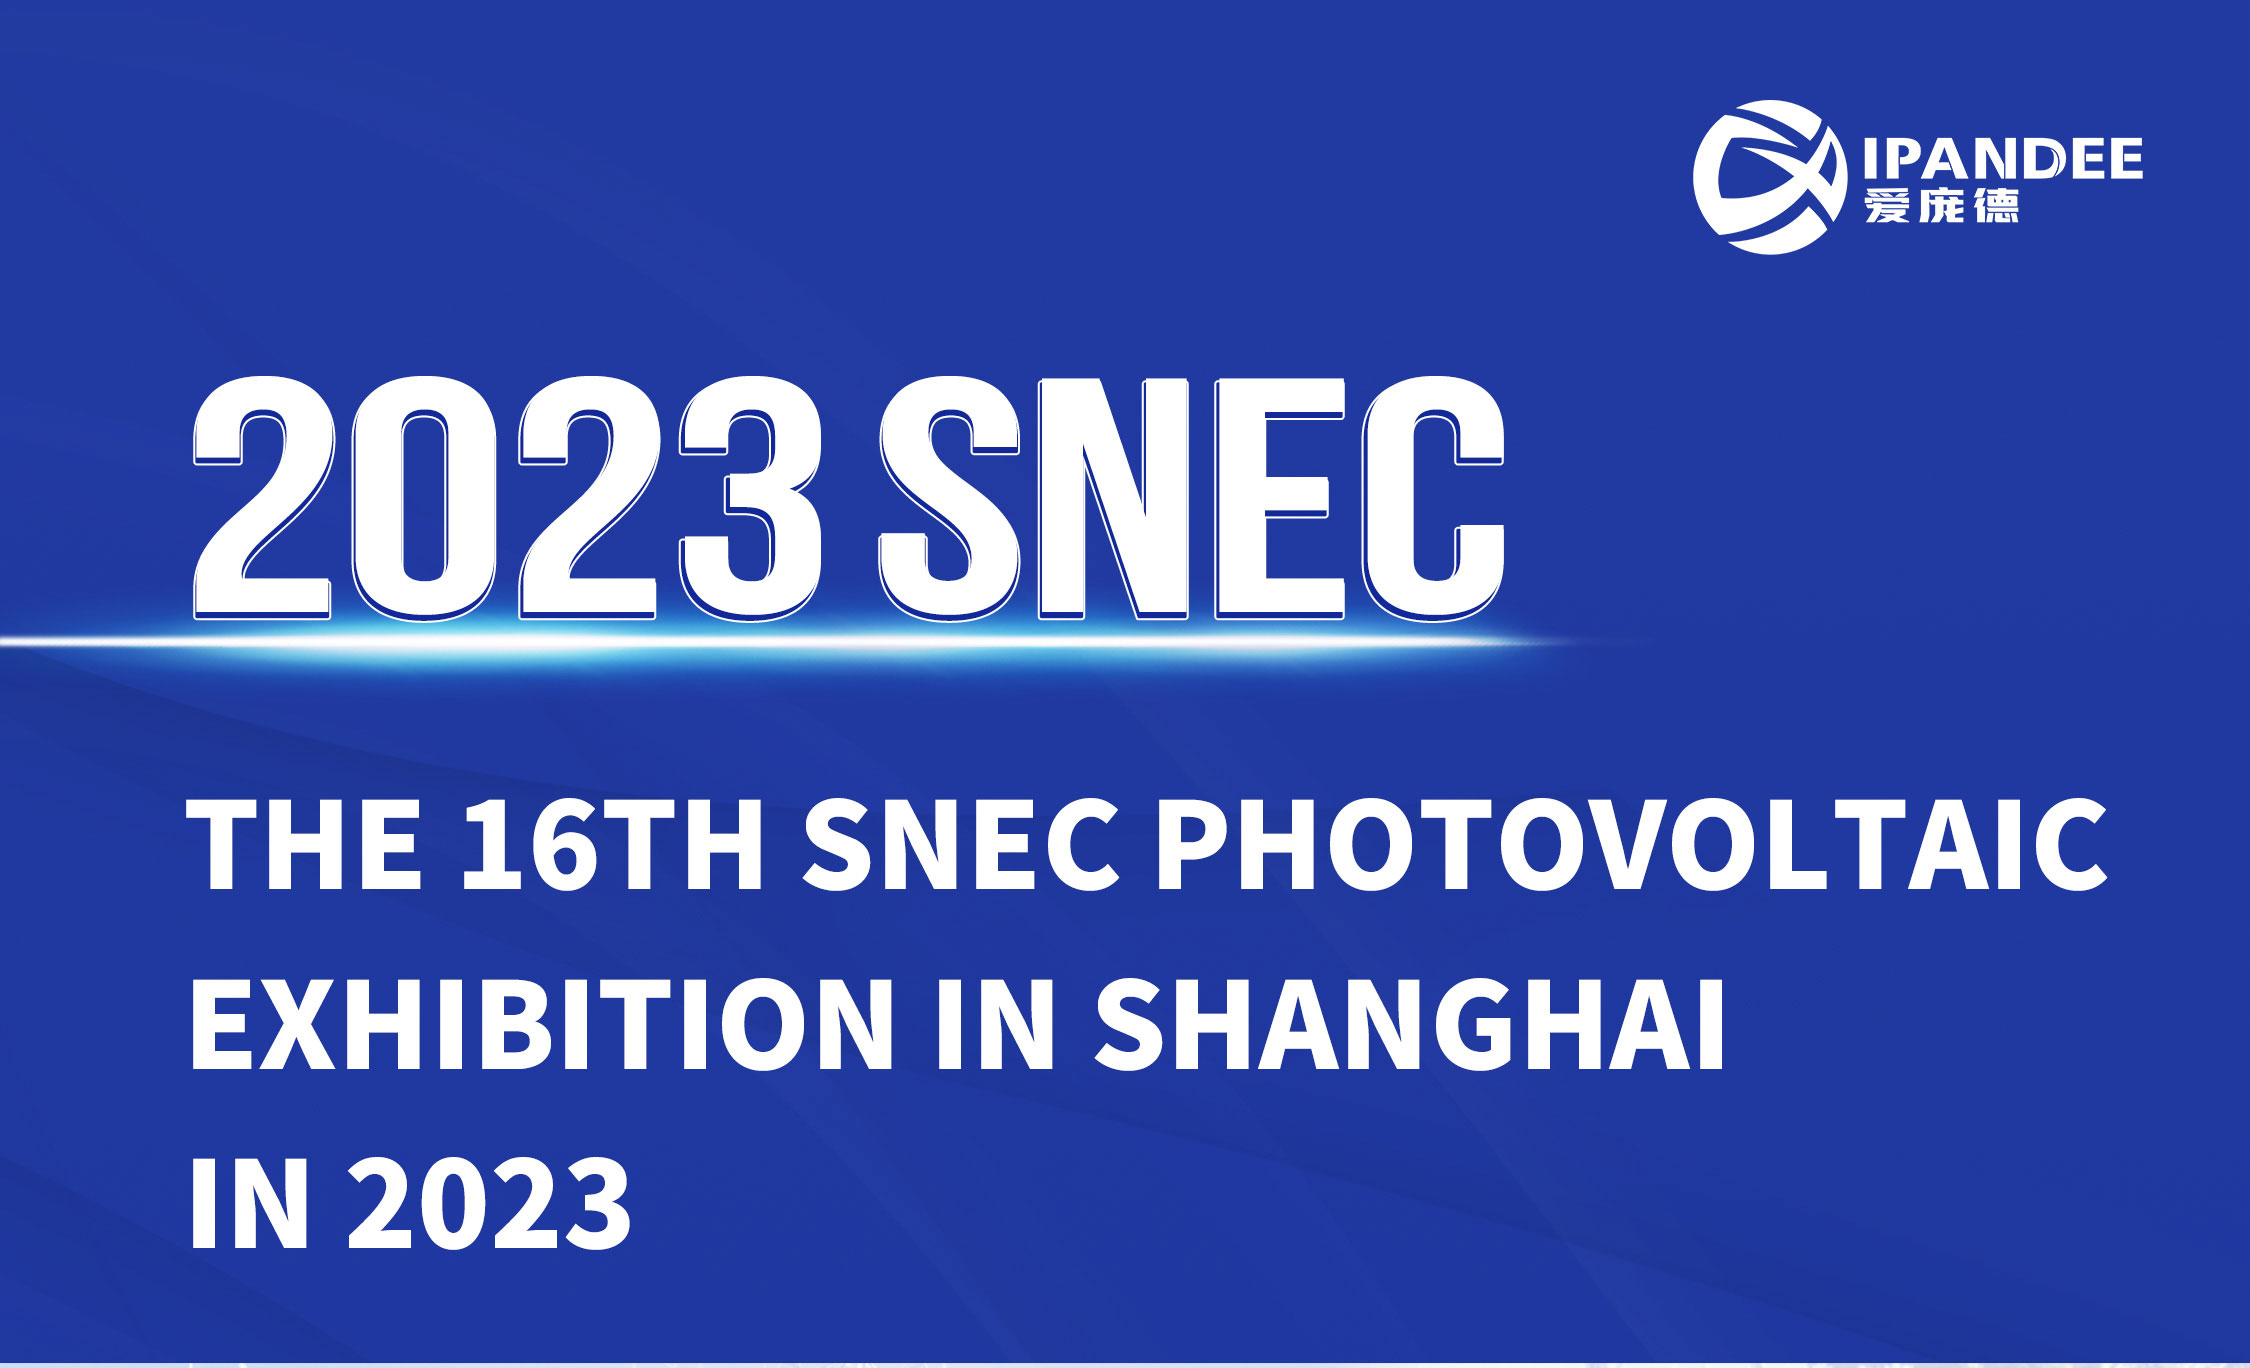 The_16th_SNEC_Photovoltaic_Exhibition_in_Shanghai_in_2023-01.jpg